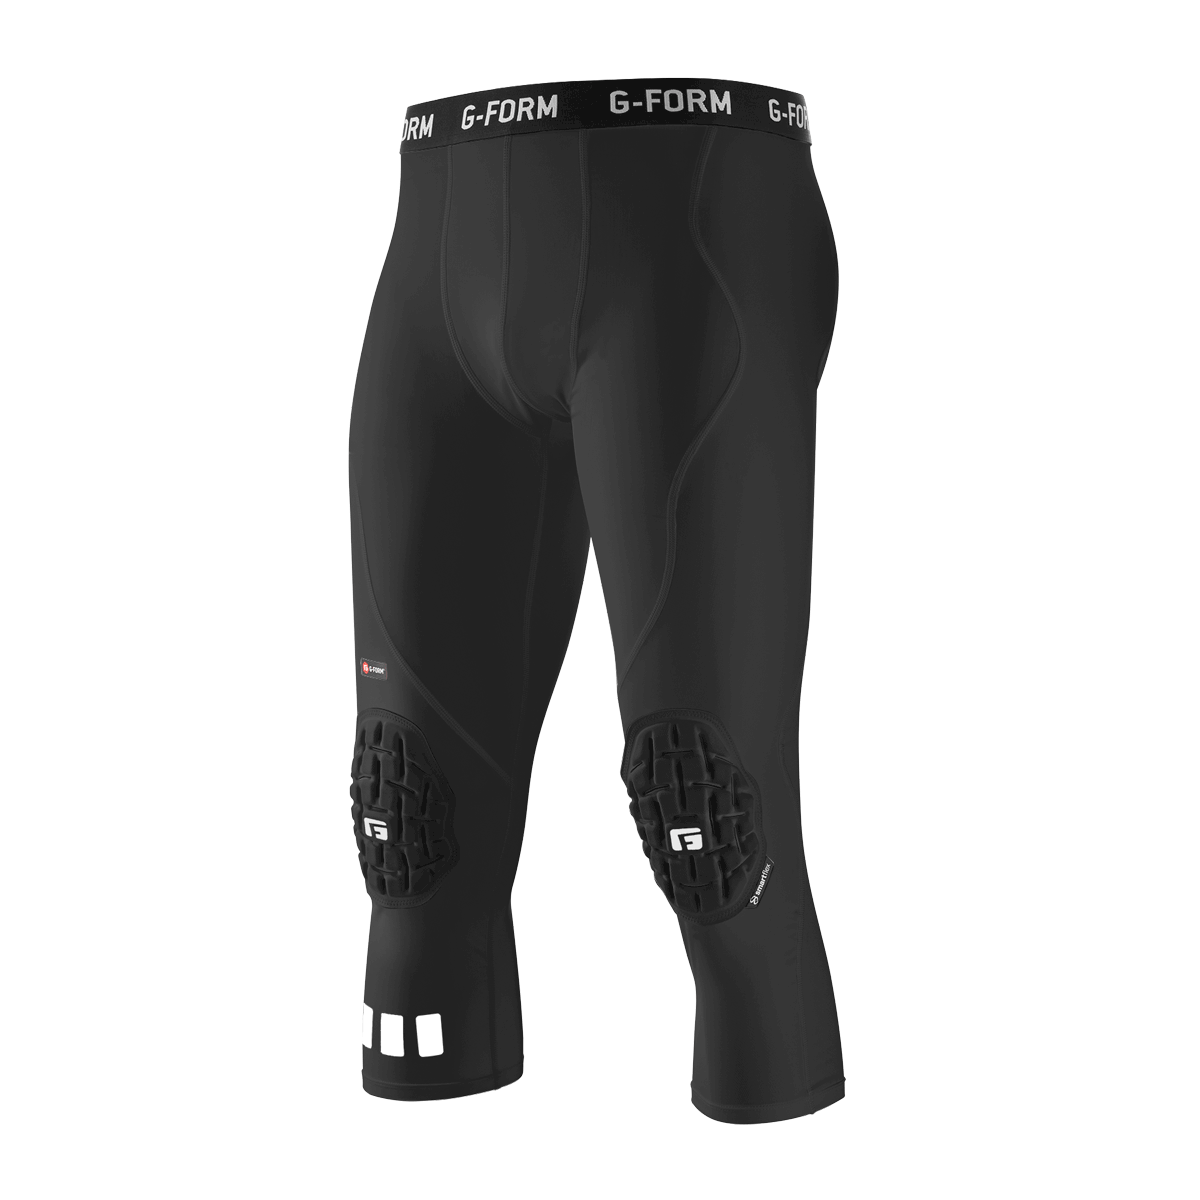 Pro 3/4 Padded Compression Pants